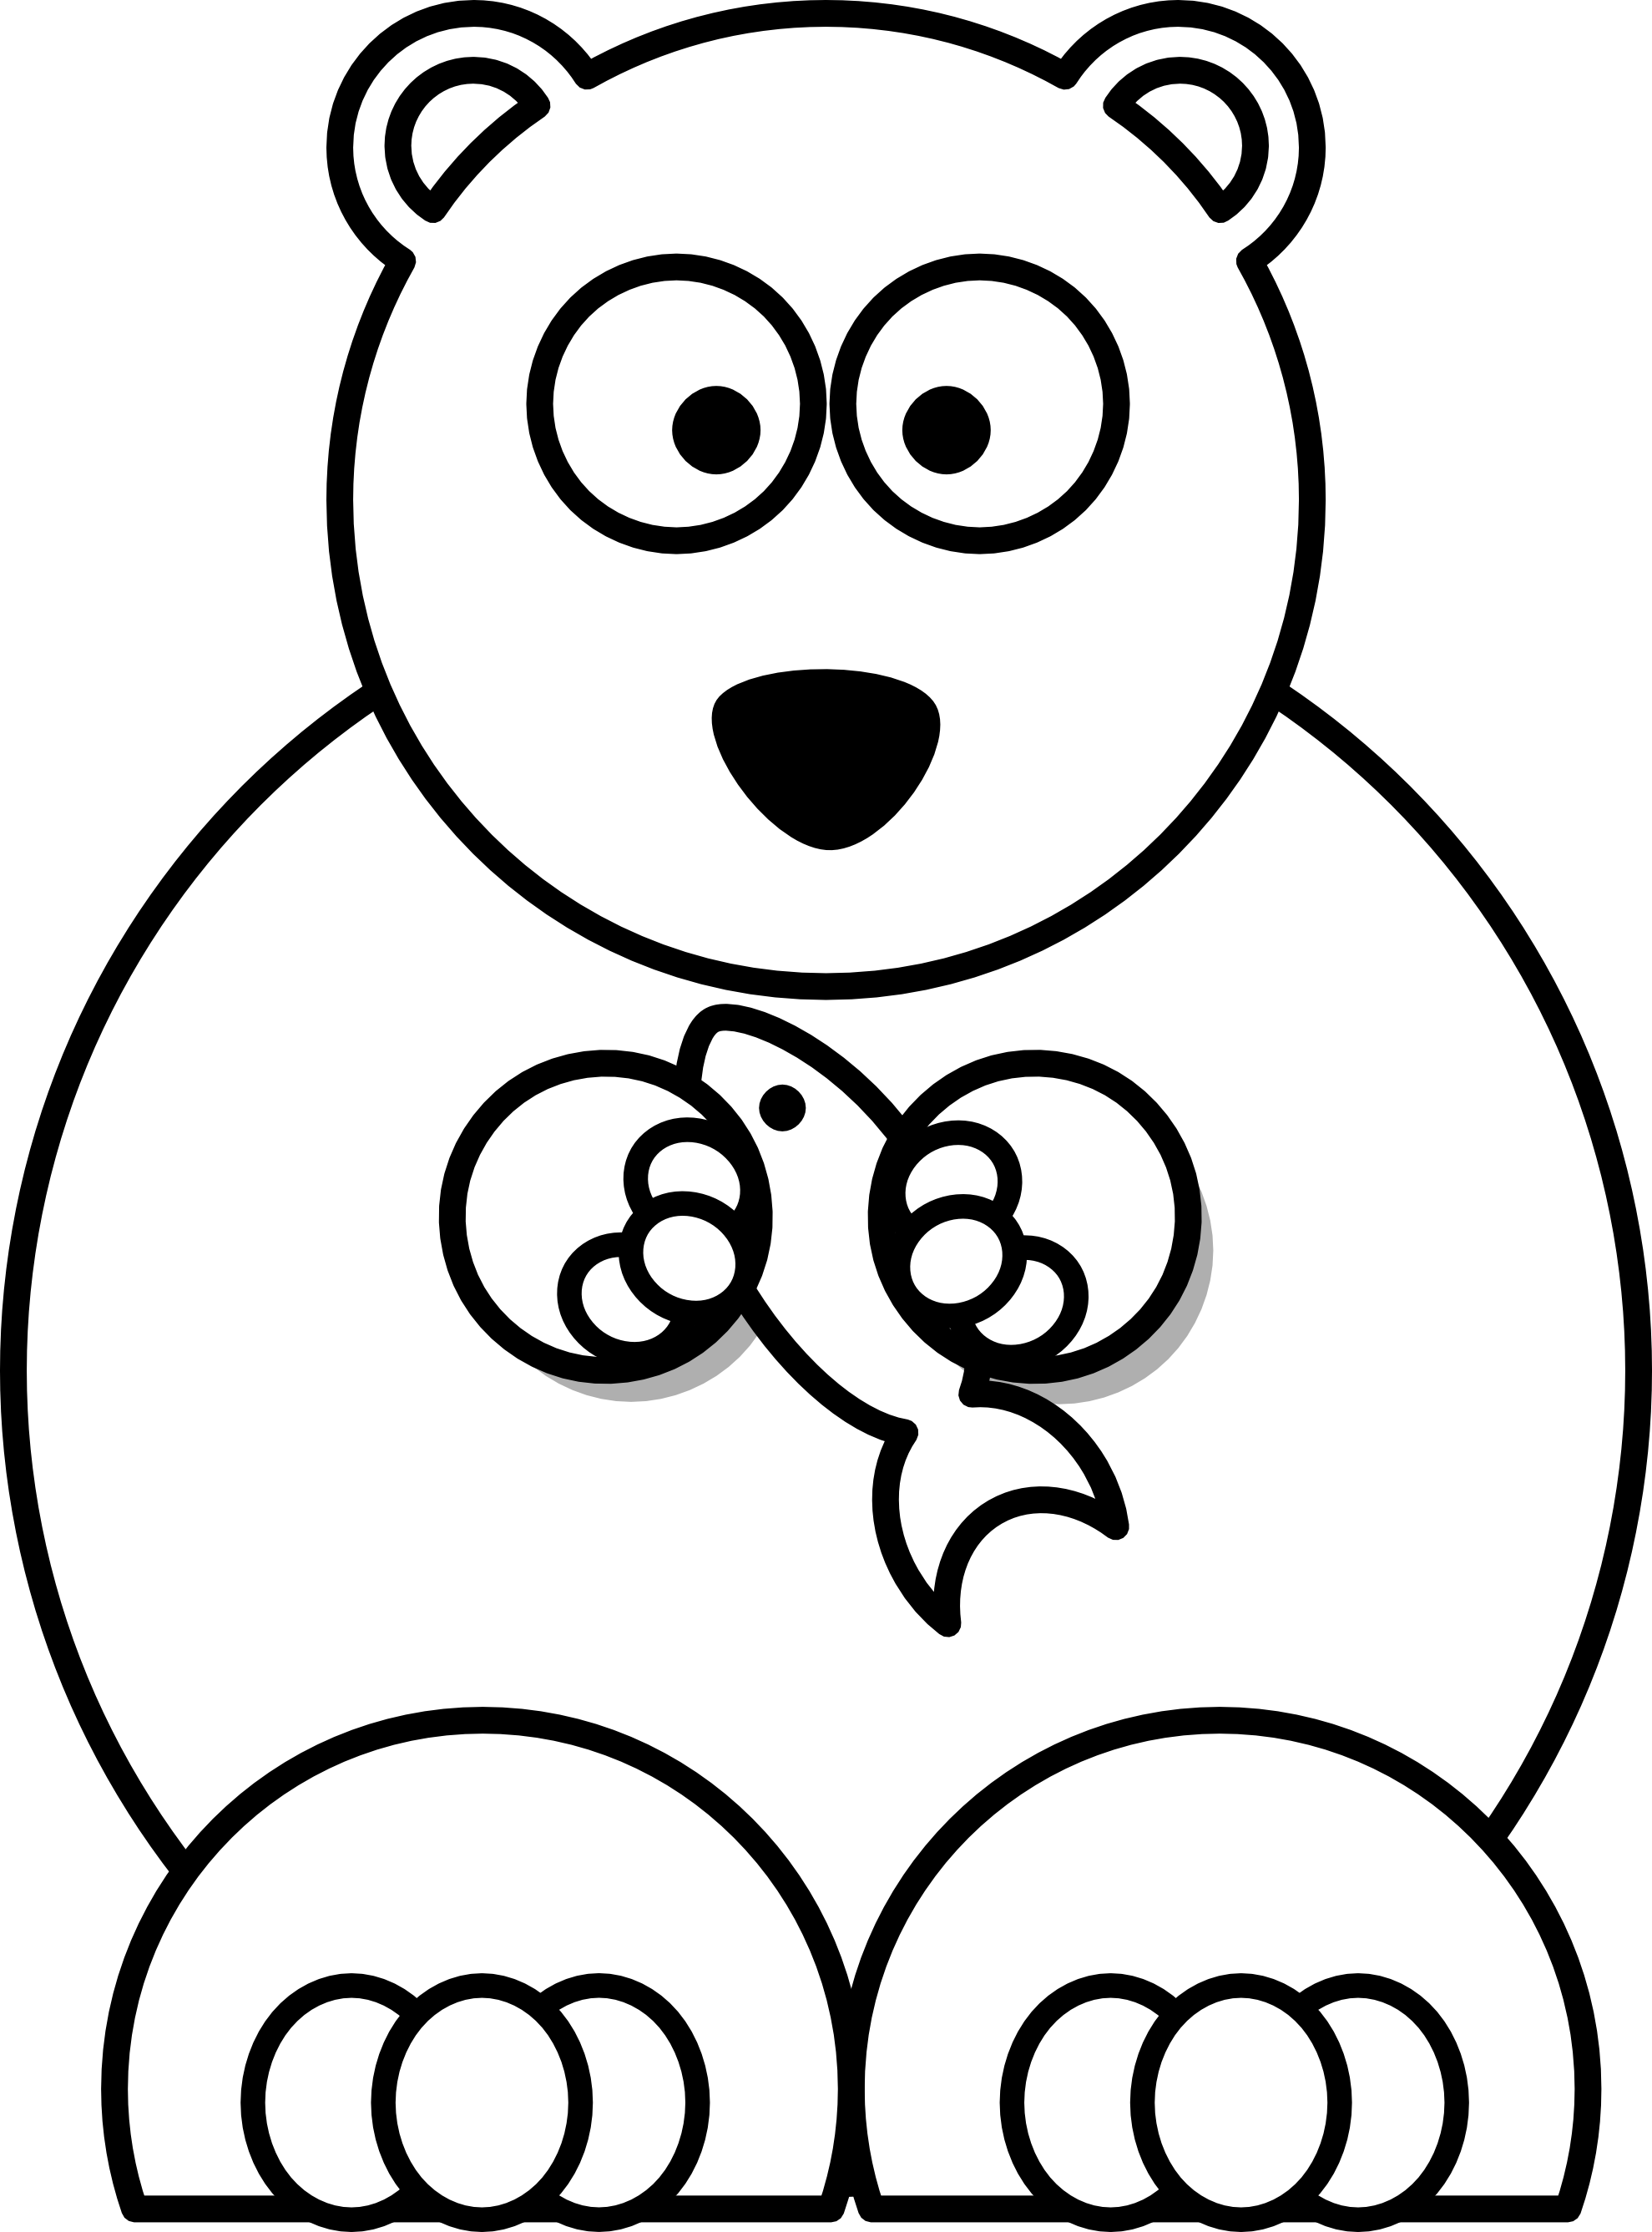 Bear  black and white teddy bear black and white clipart